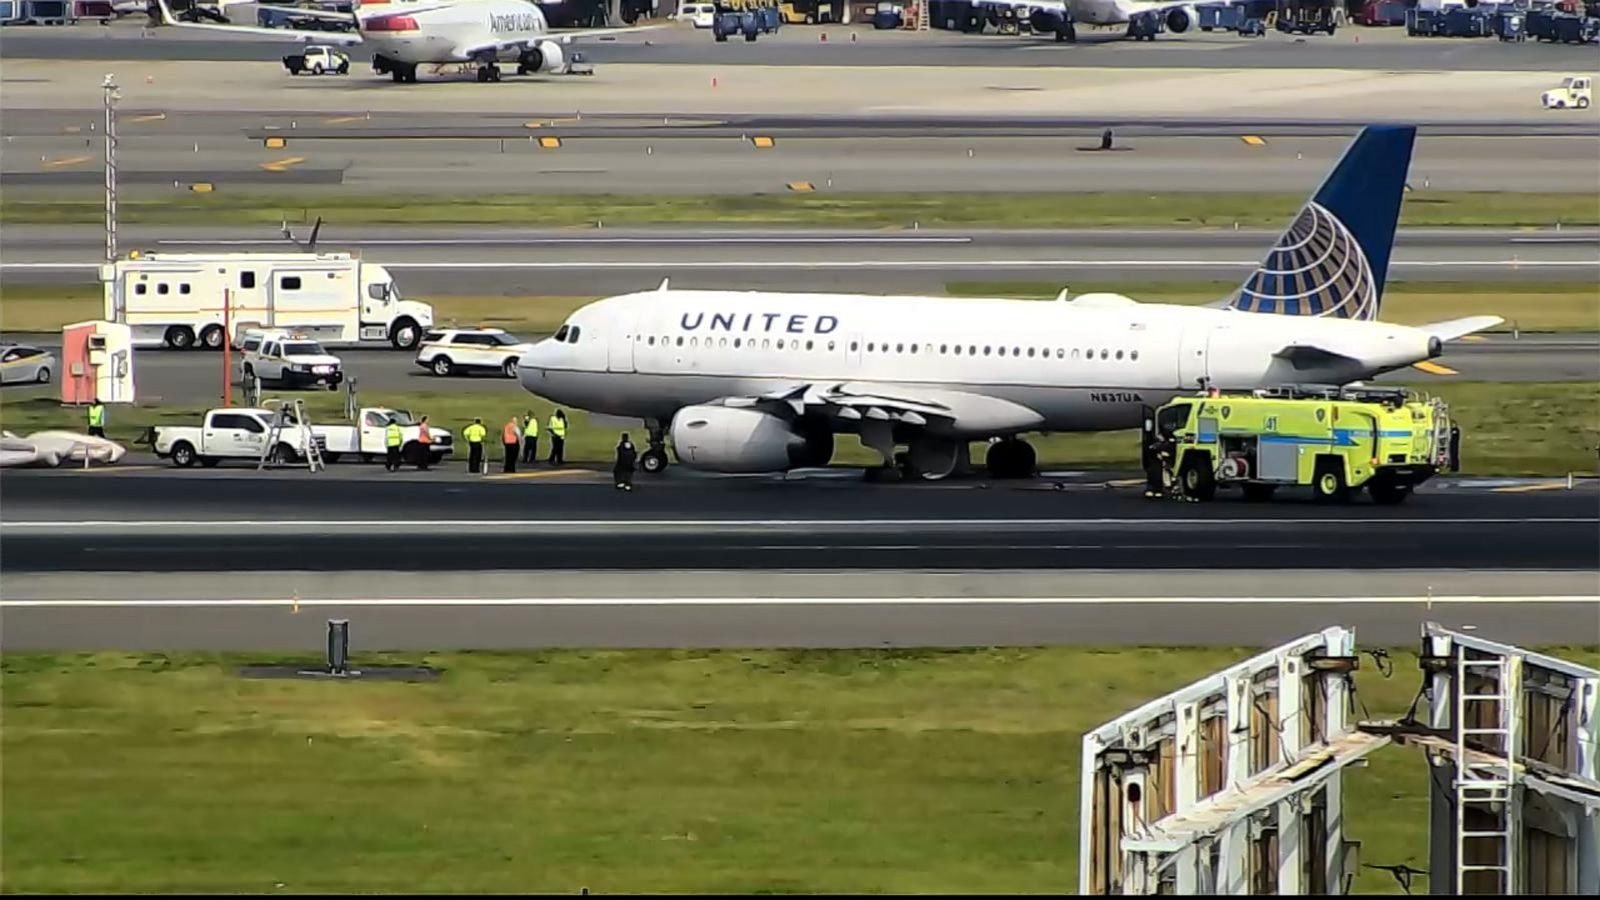 Newark Airport temporarily closes after United jet's emergency landing